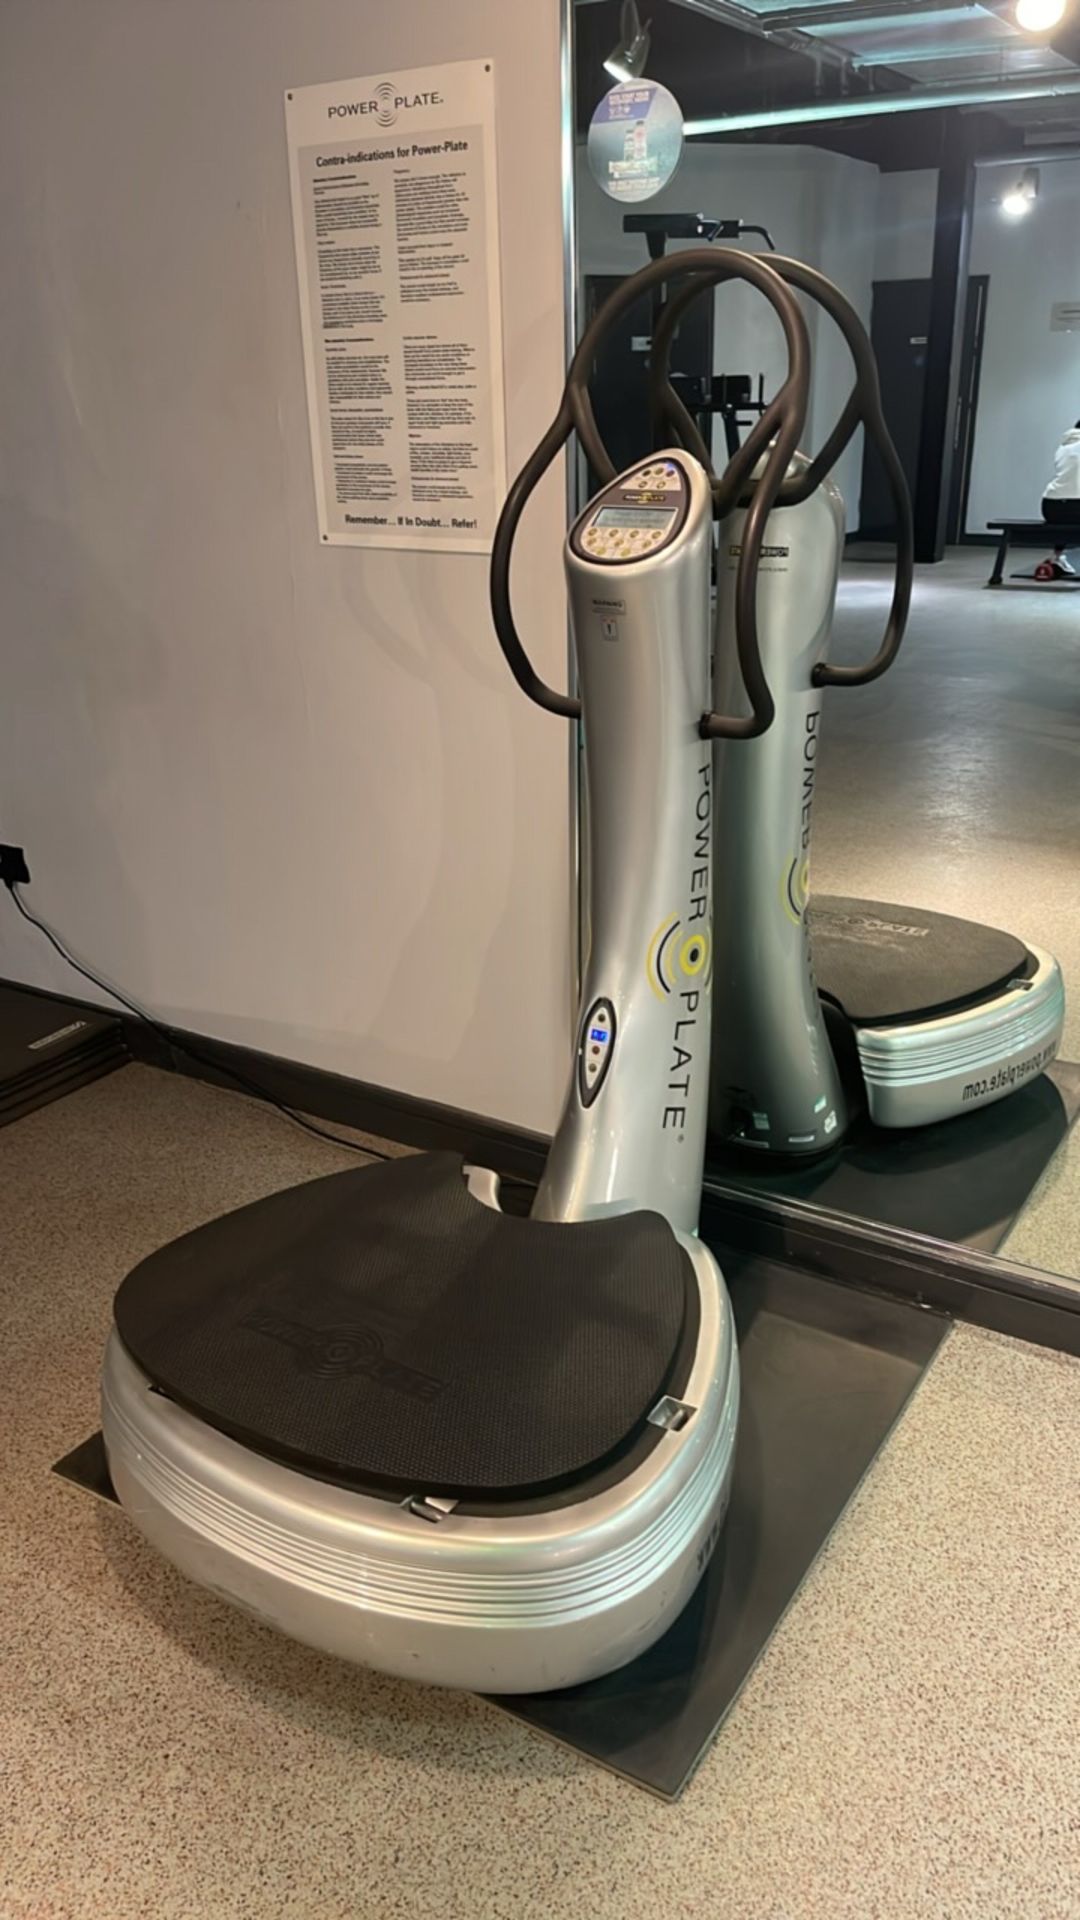 Power Plate - Image 2 of 7